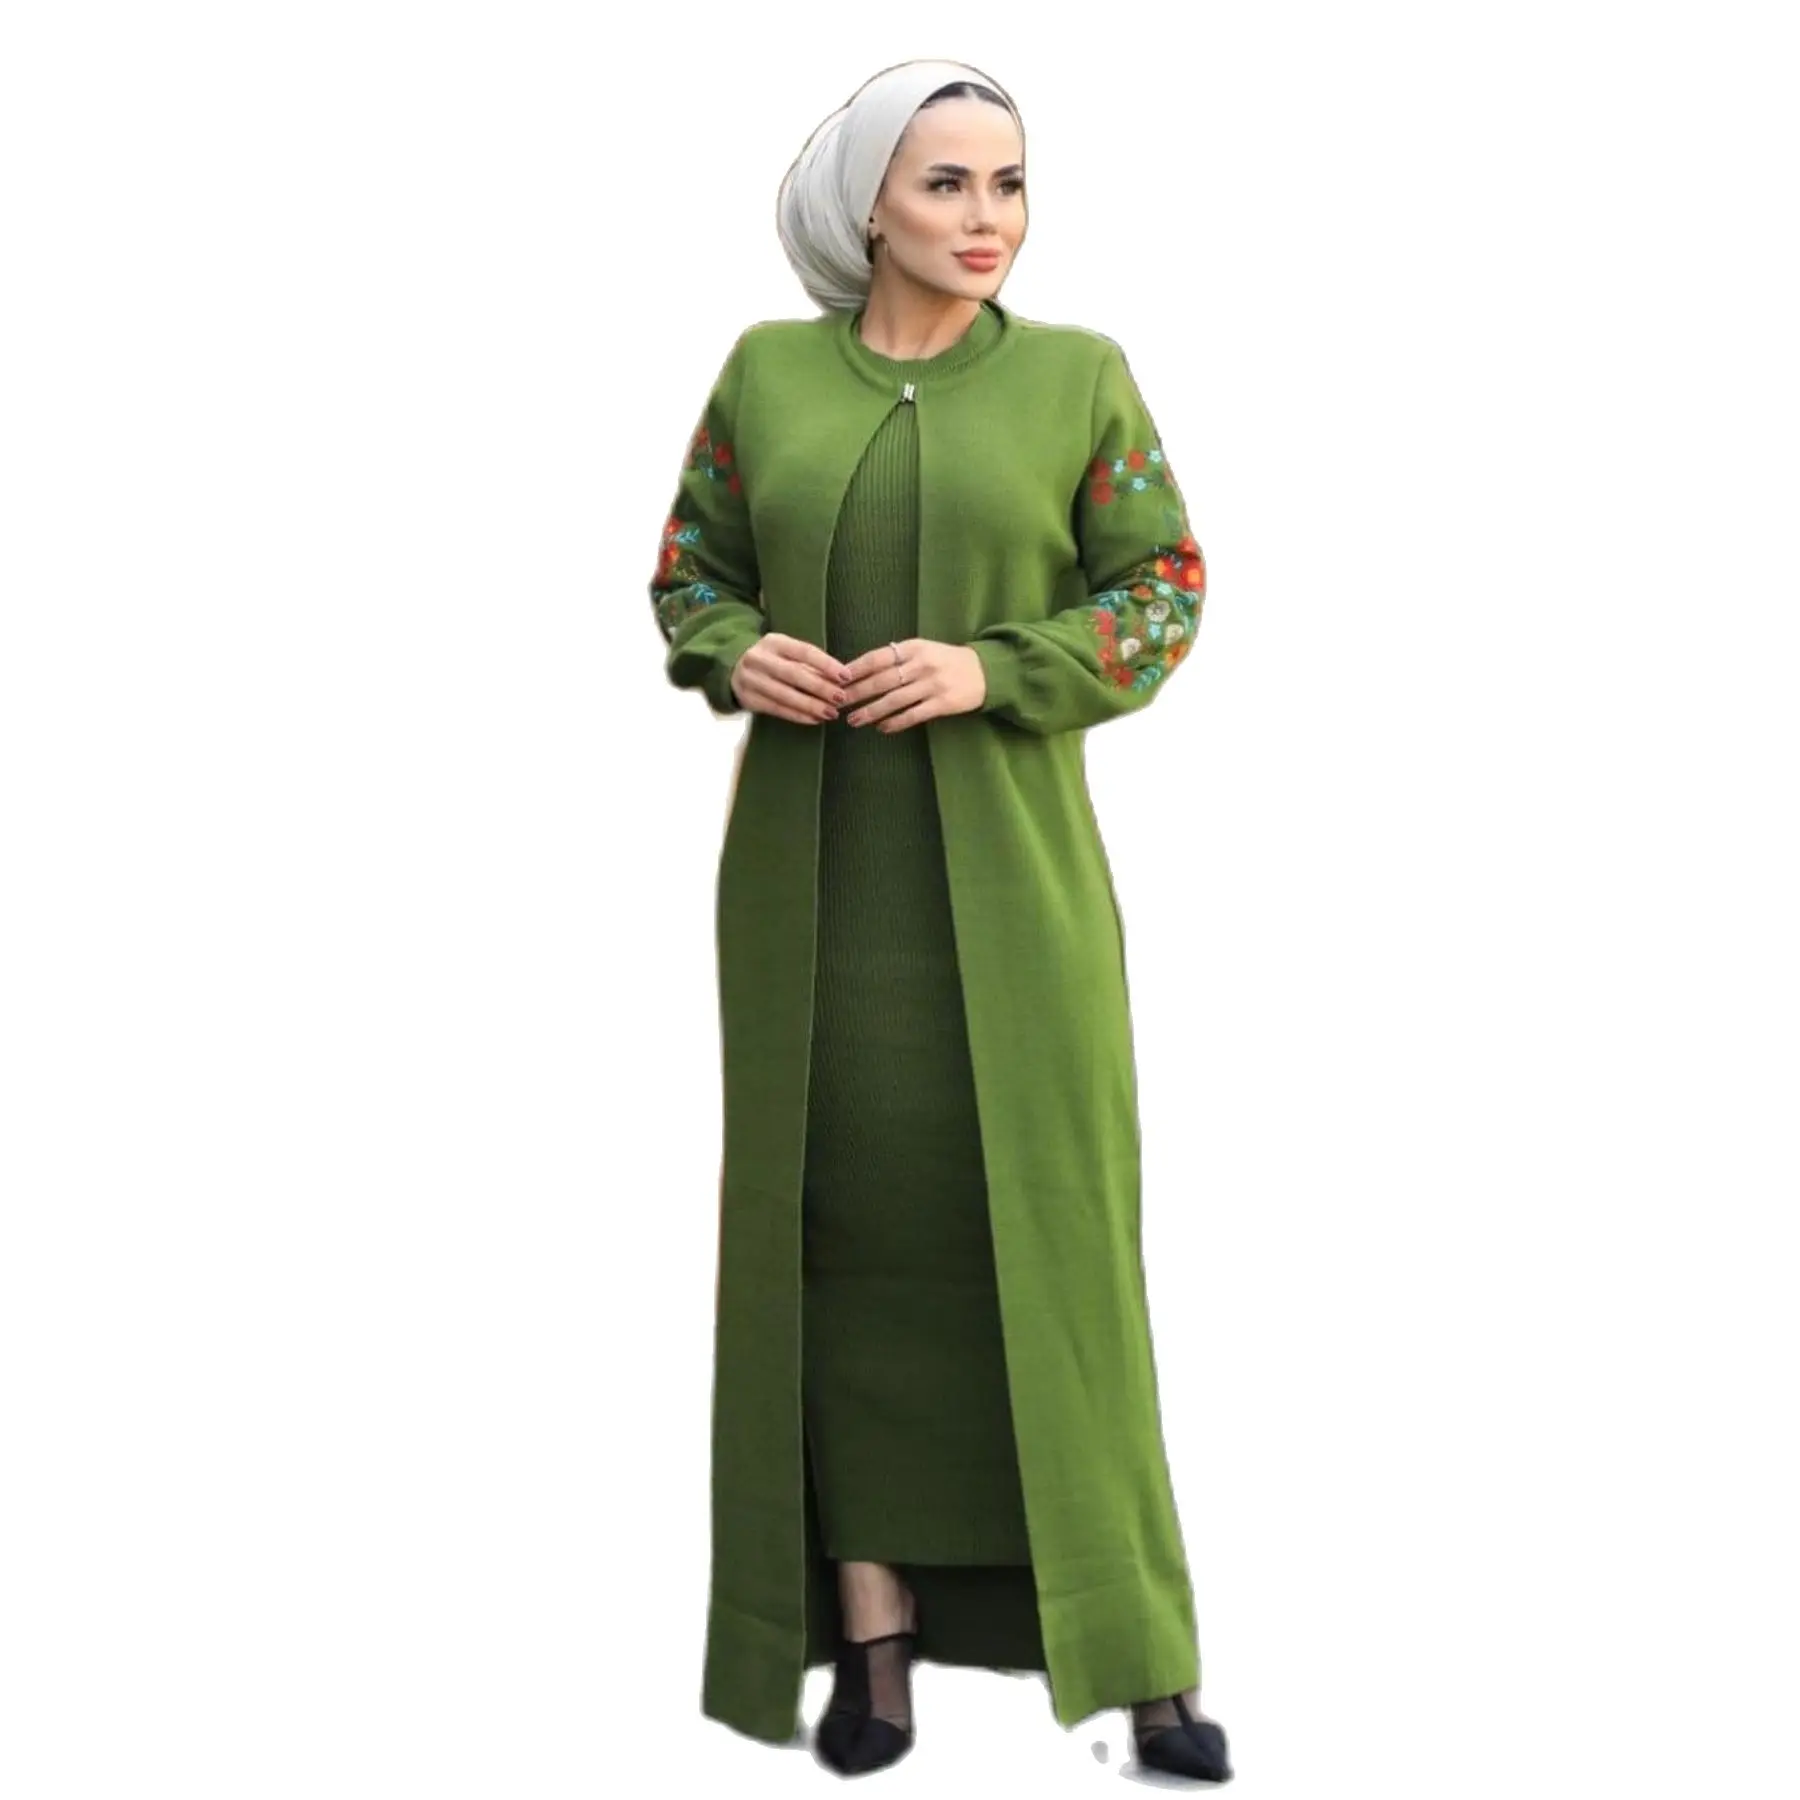 2 Piece Women's Set Embroidery Patterned Knitwear Maxi O-Neck Flower Pattern Sleeved Dress and Maxi Cardigan Long Sleeve Turkey